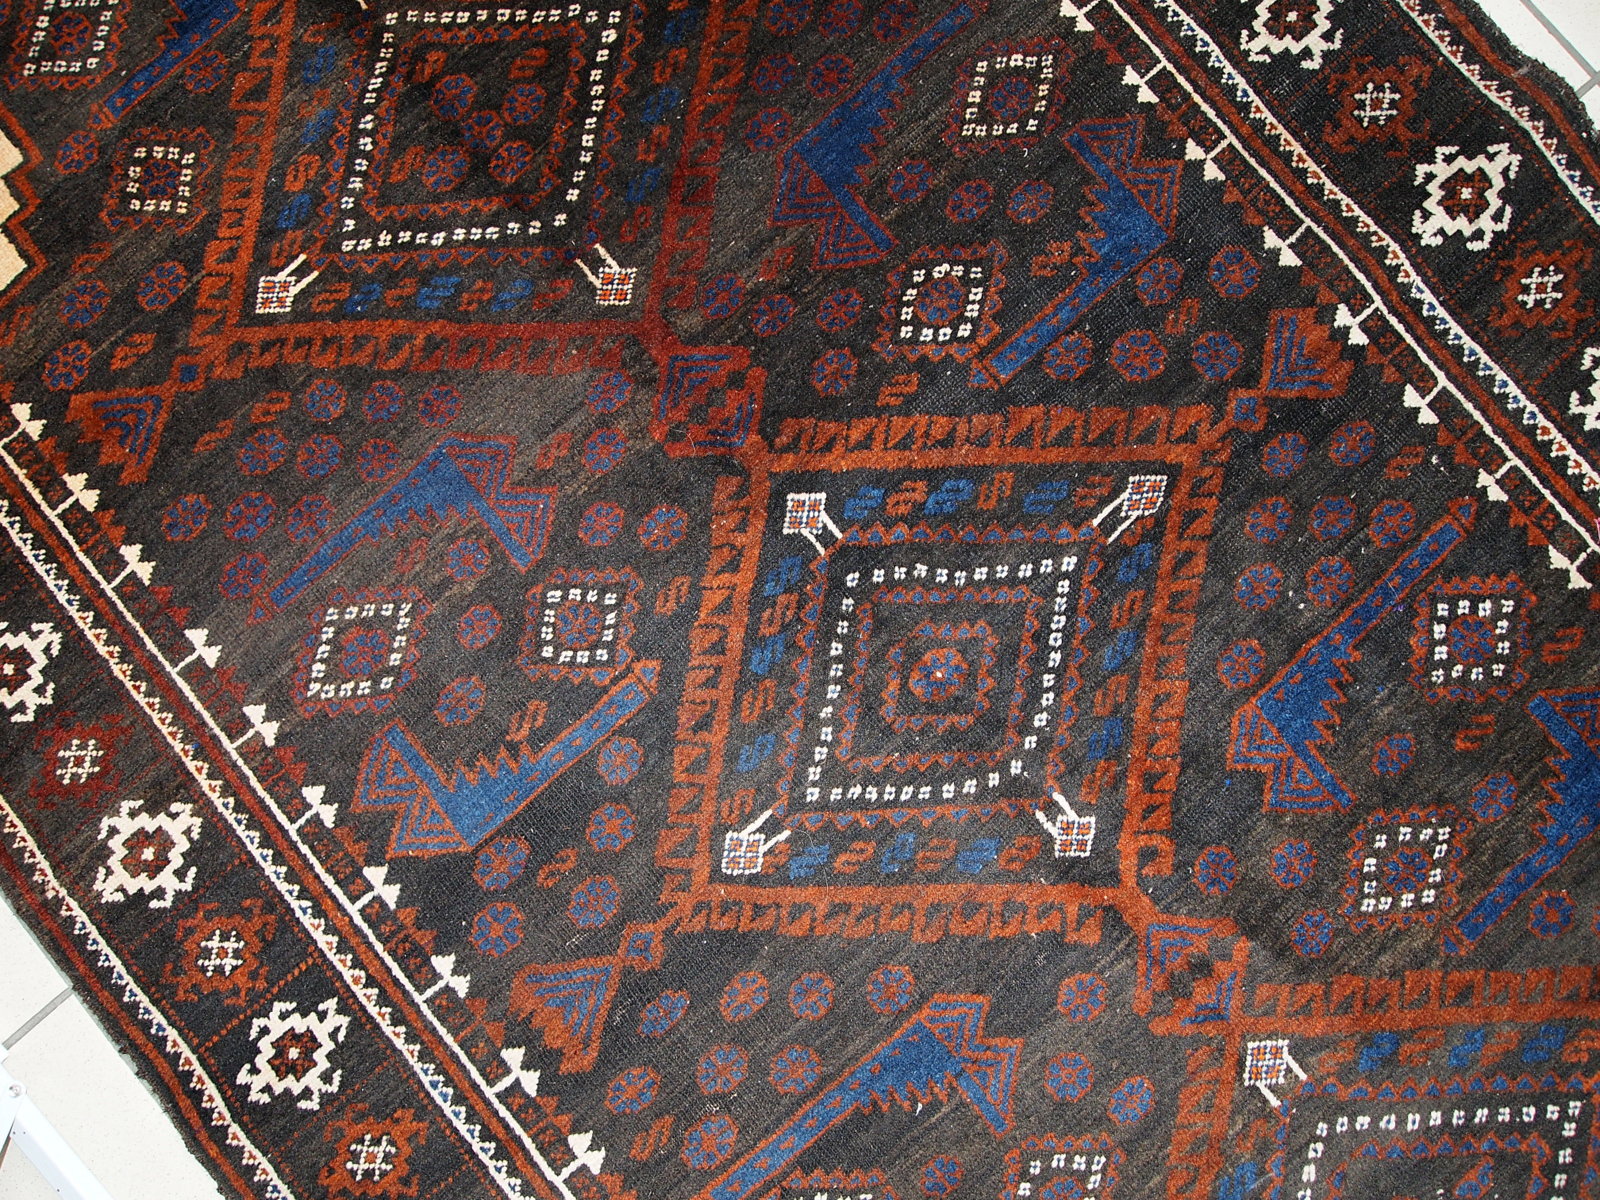 Detailed view of the rug's border and edge patterns.